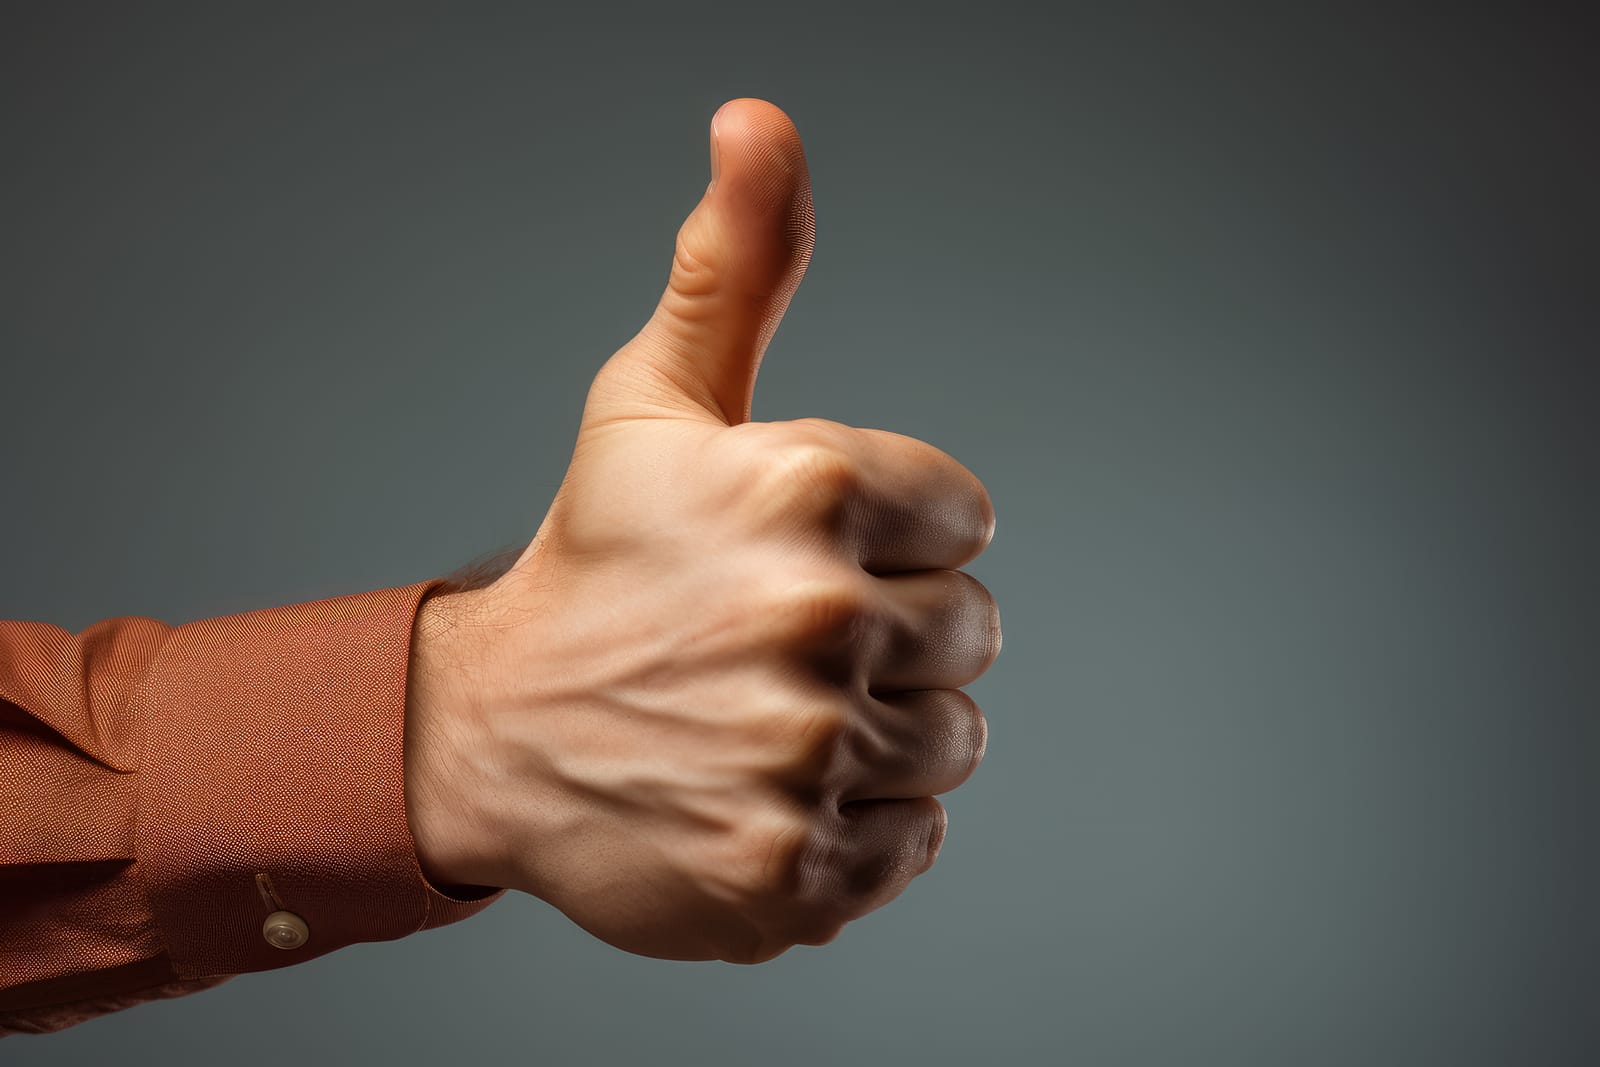 A close-up of a person's hand showing a thumbs up gesture, wearing an orange shirt against a gray background, symbolizing approval of a distribution agreement.